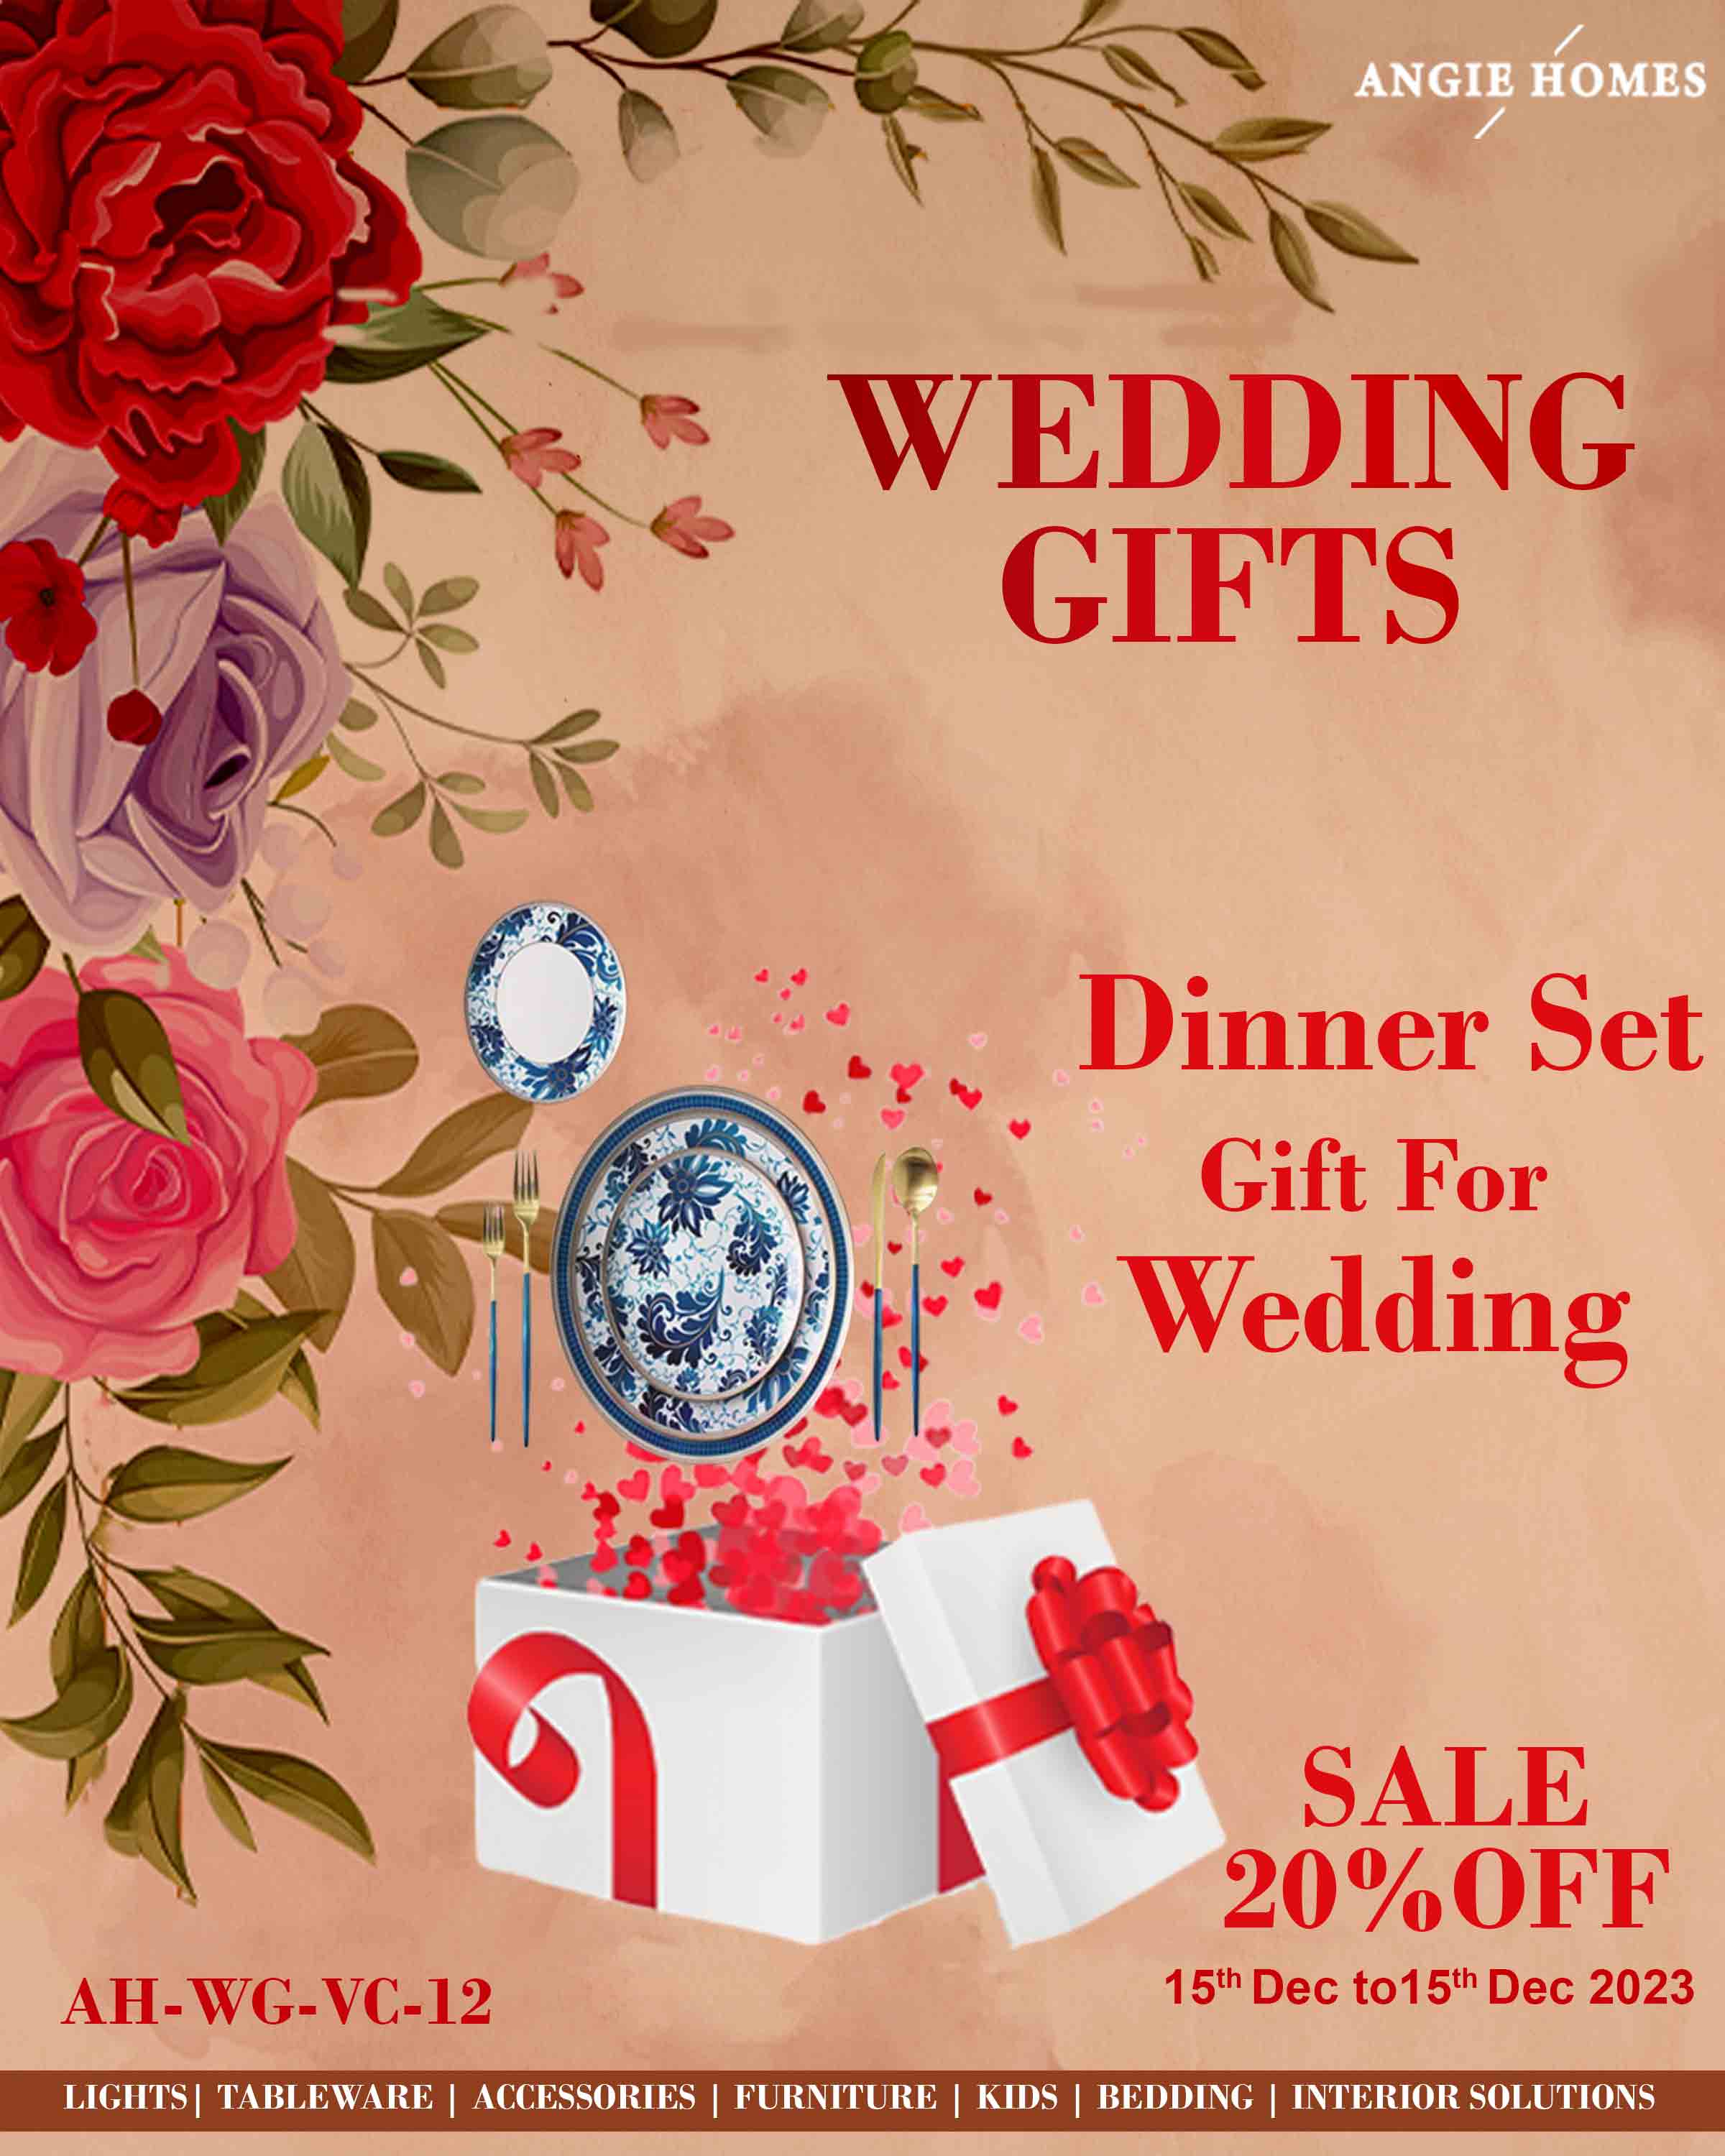 DINNER SET FOR WEDDING GIFTS | MARRIAGE GIFT VOUCHER | PREMIUM GIFTTING CARD ANGIE HOMES